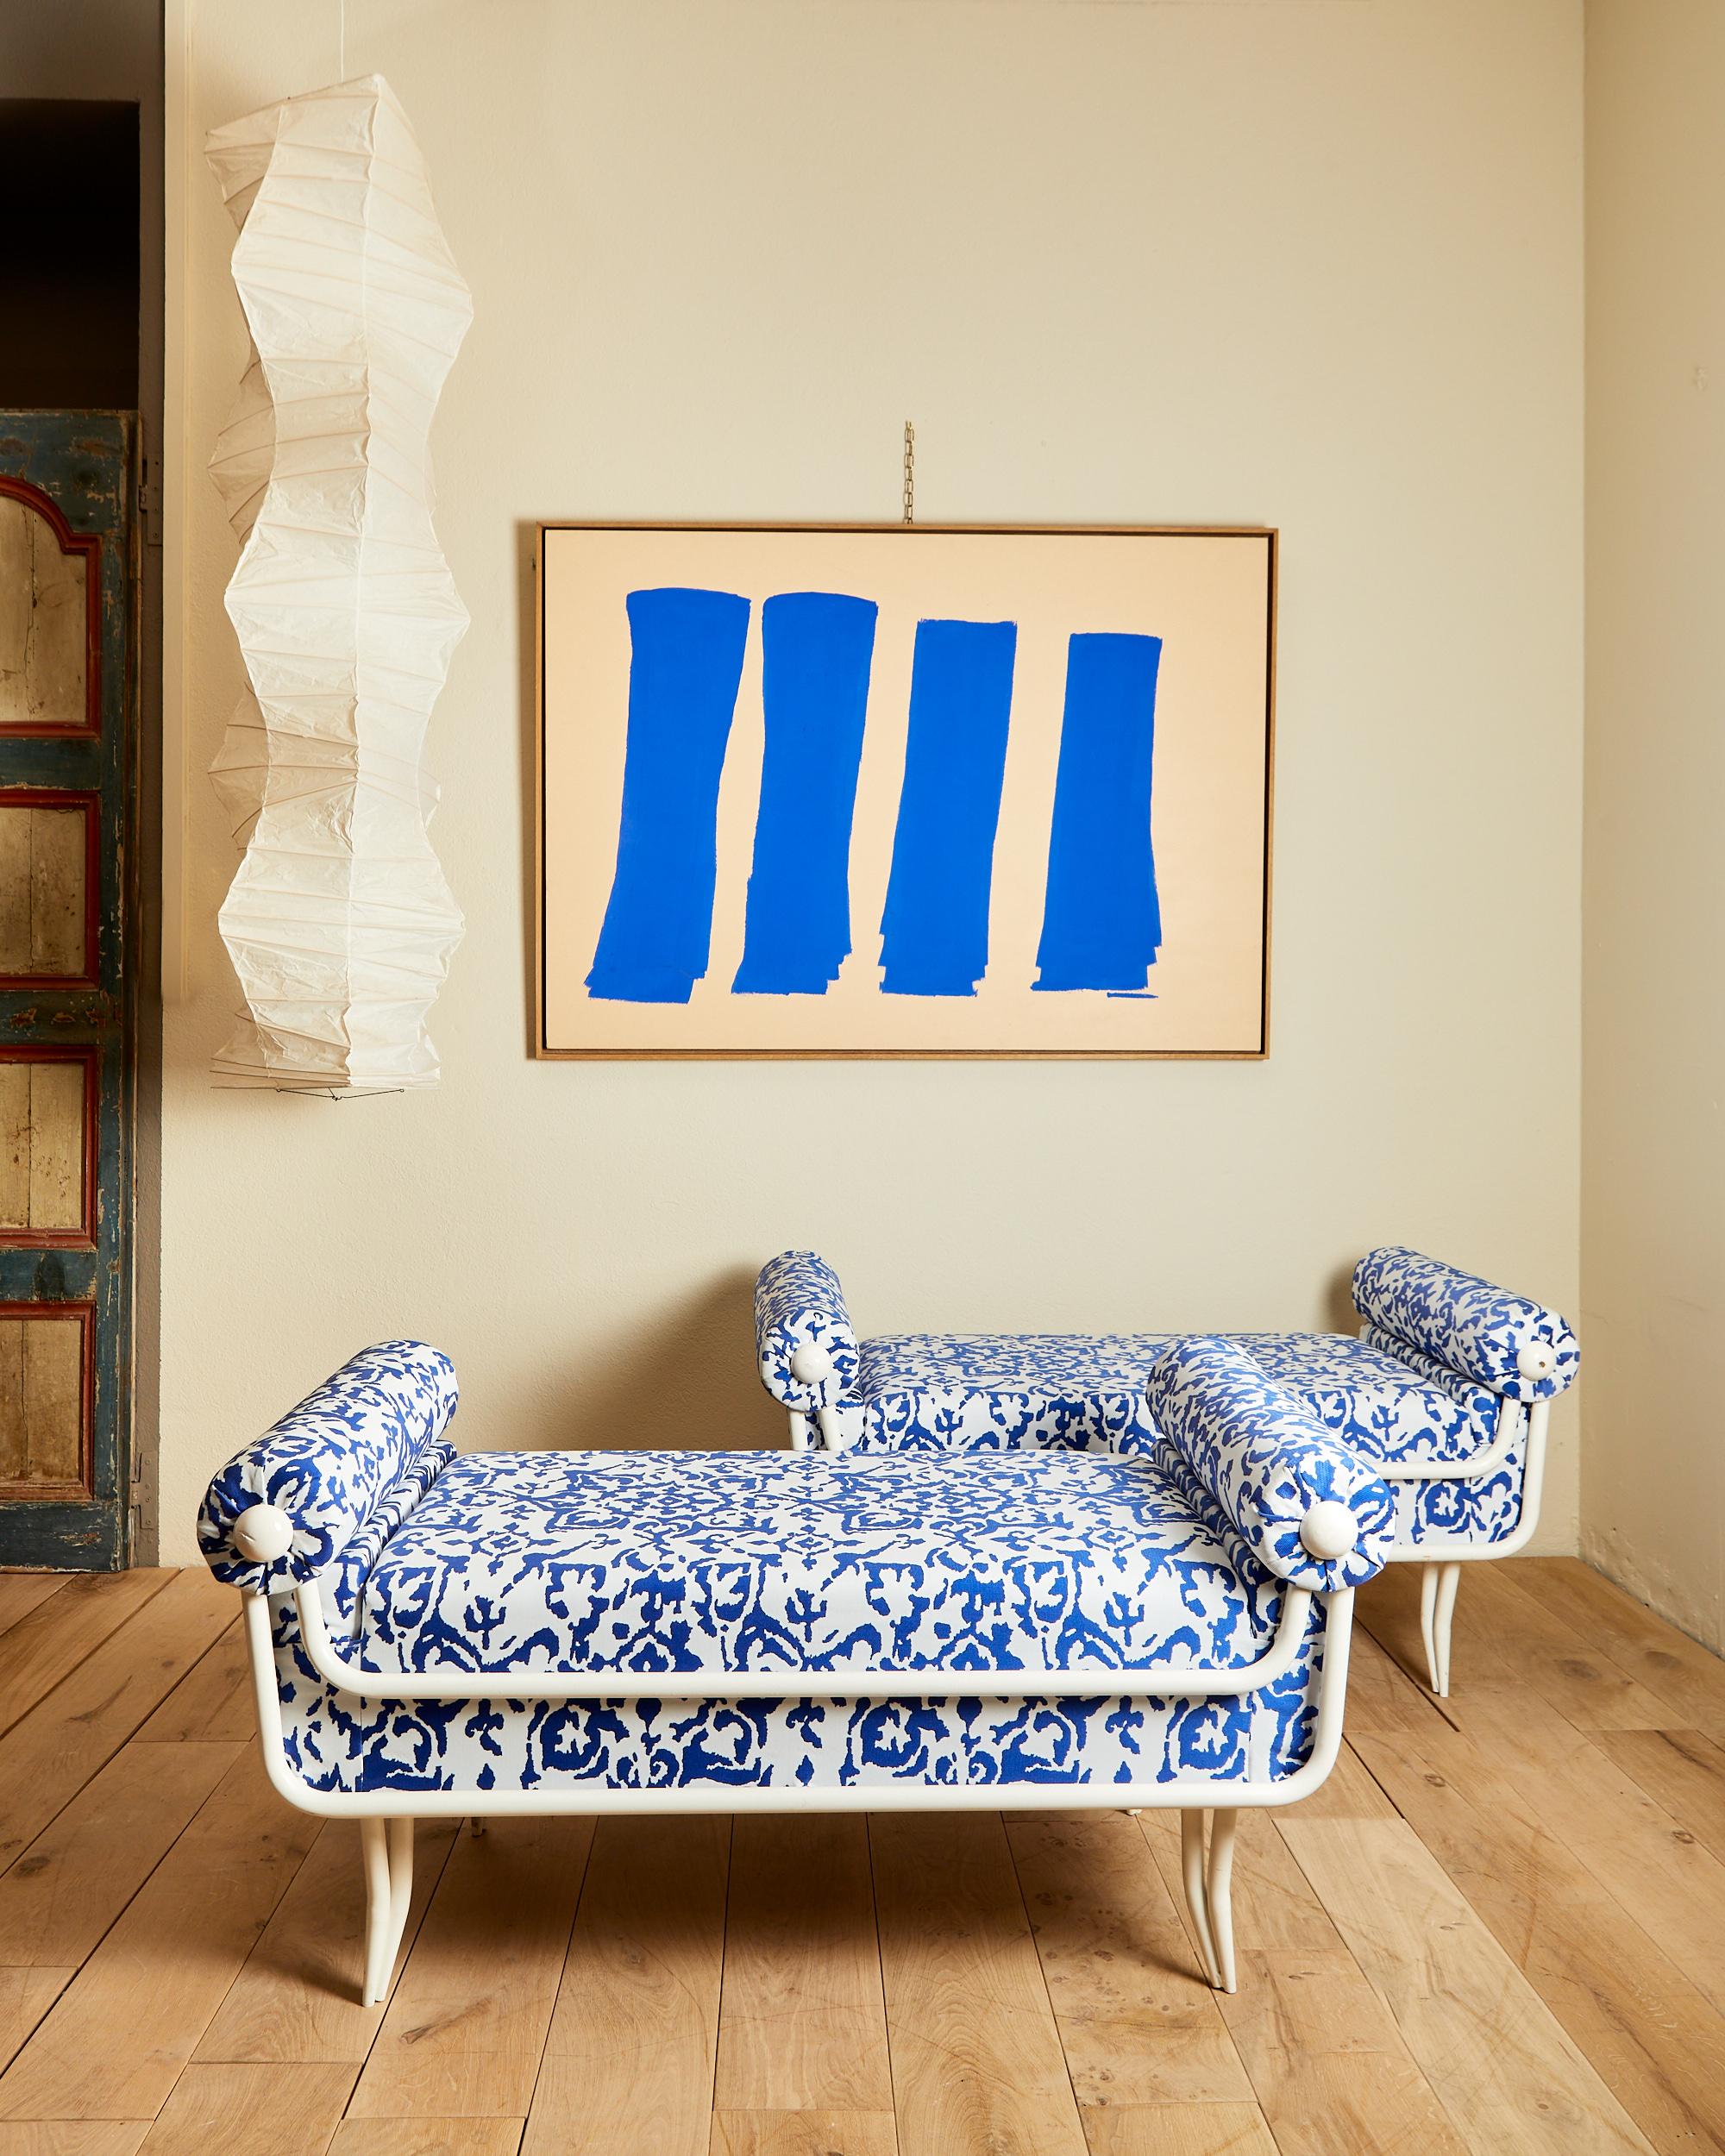 René Prou (1889-1947),
set of four sofas,
white lacquered iron, fabric and wood,
circa 1950, France.
Measures: Height: 63 cm, seat height: 50 cm,
width: 1m23, depth: 67 cm.